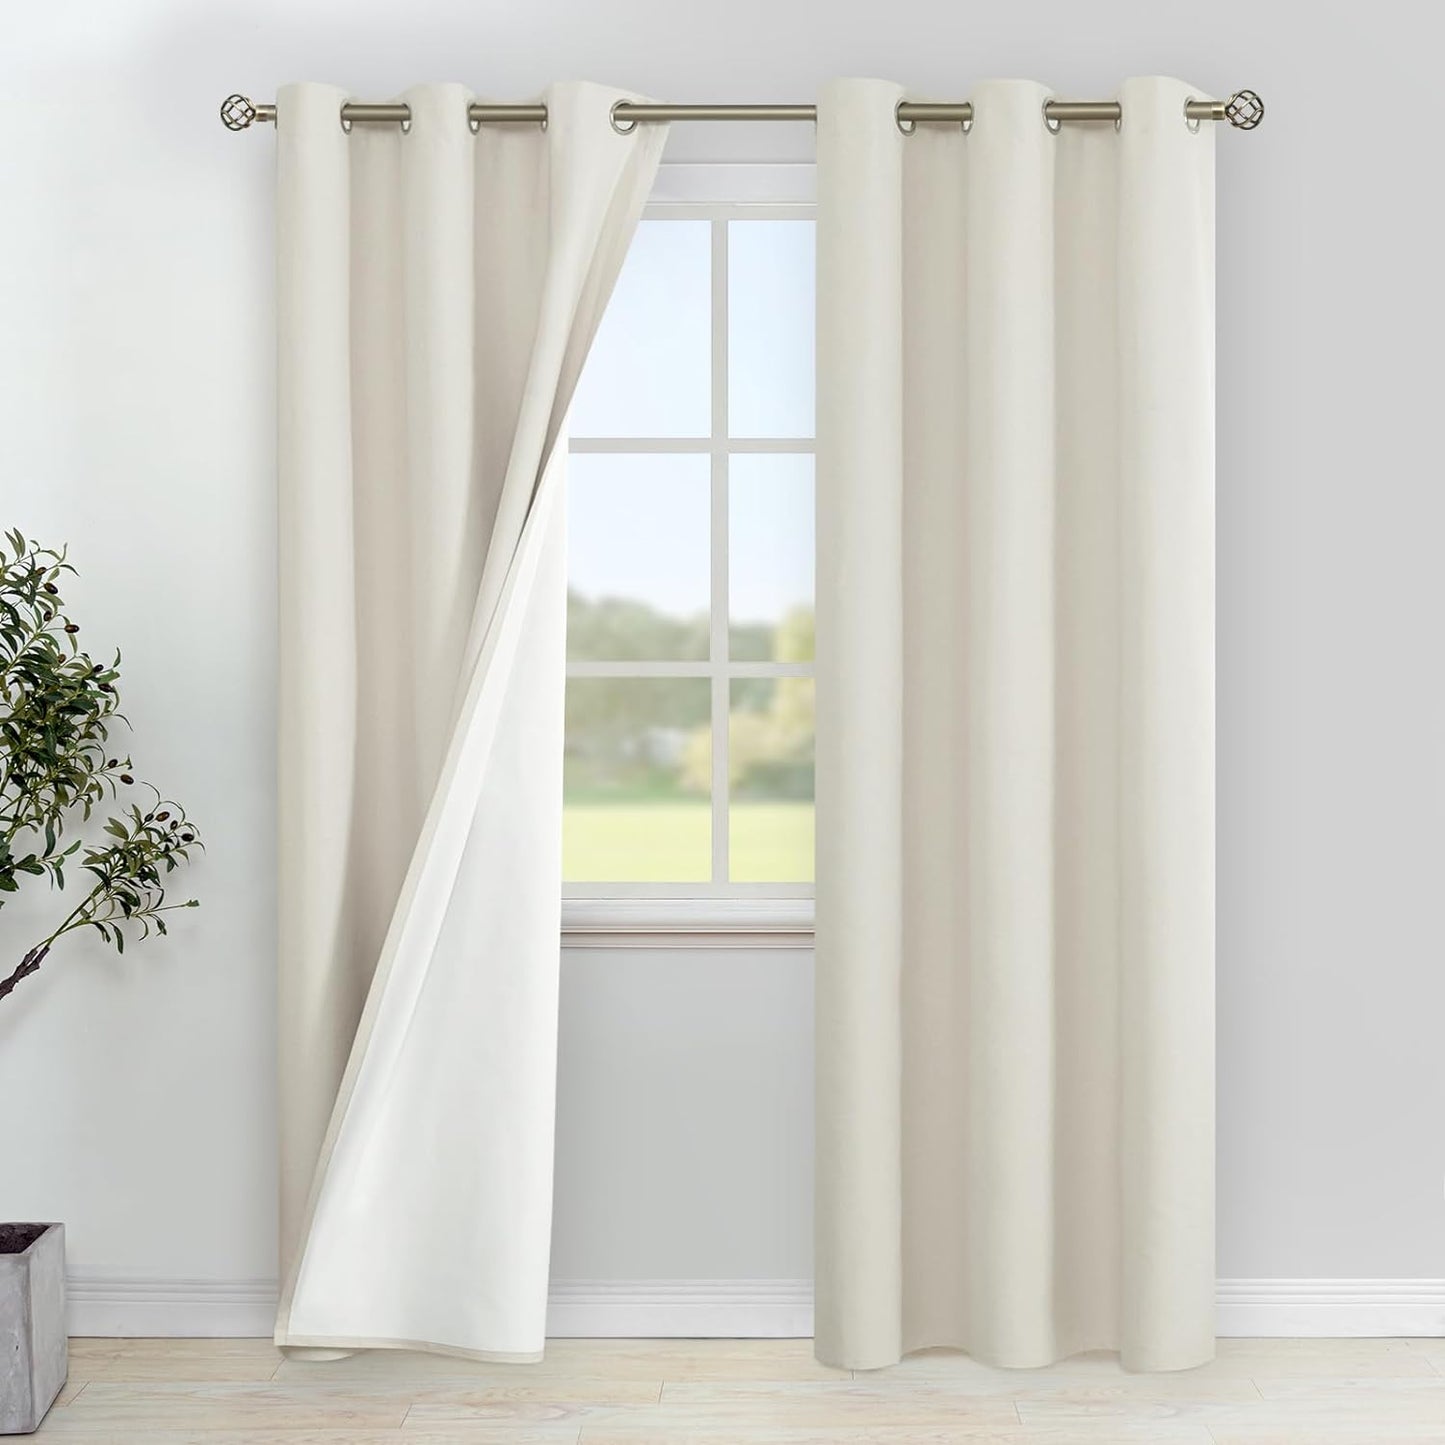 Youngstex Linen Blackout Curtains 63 Inches Long, Grommet Full Room Darkening Linen Window Drapes Thermal Insulated for Living Room Bedroom, 2 Panels, 52 X 63 Inch, Linen  YoungsTex Linen 42W X 84L 